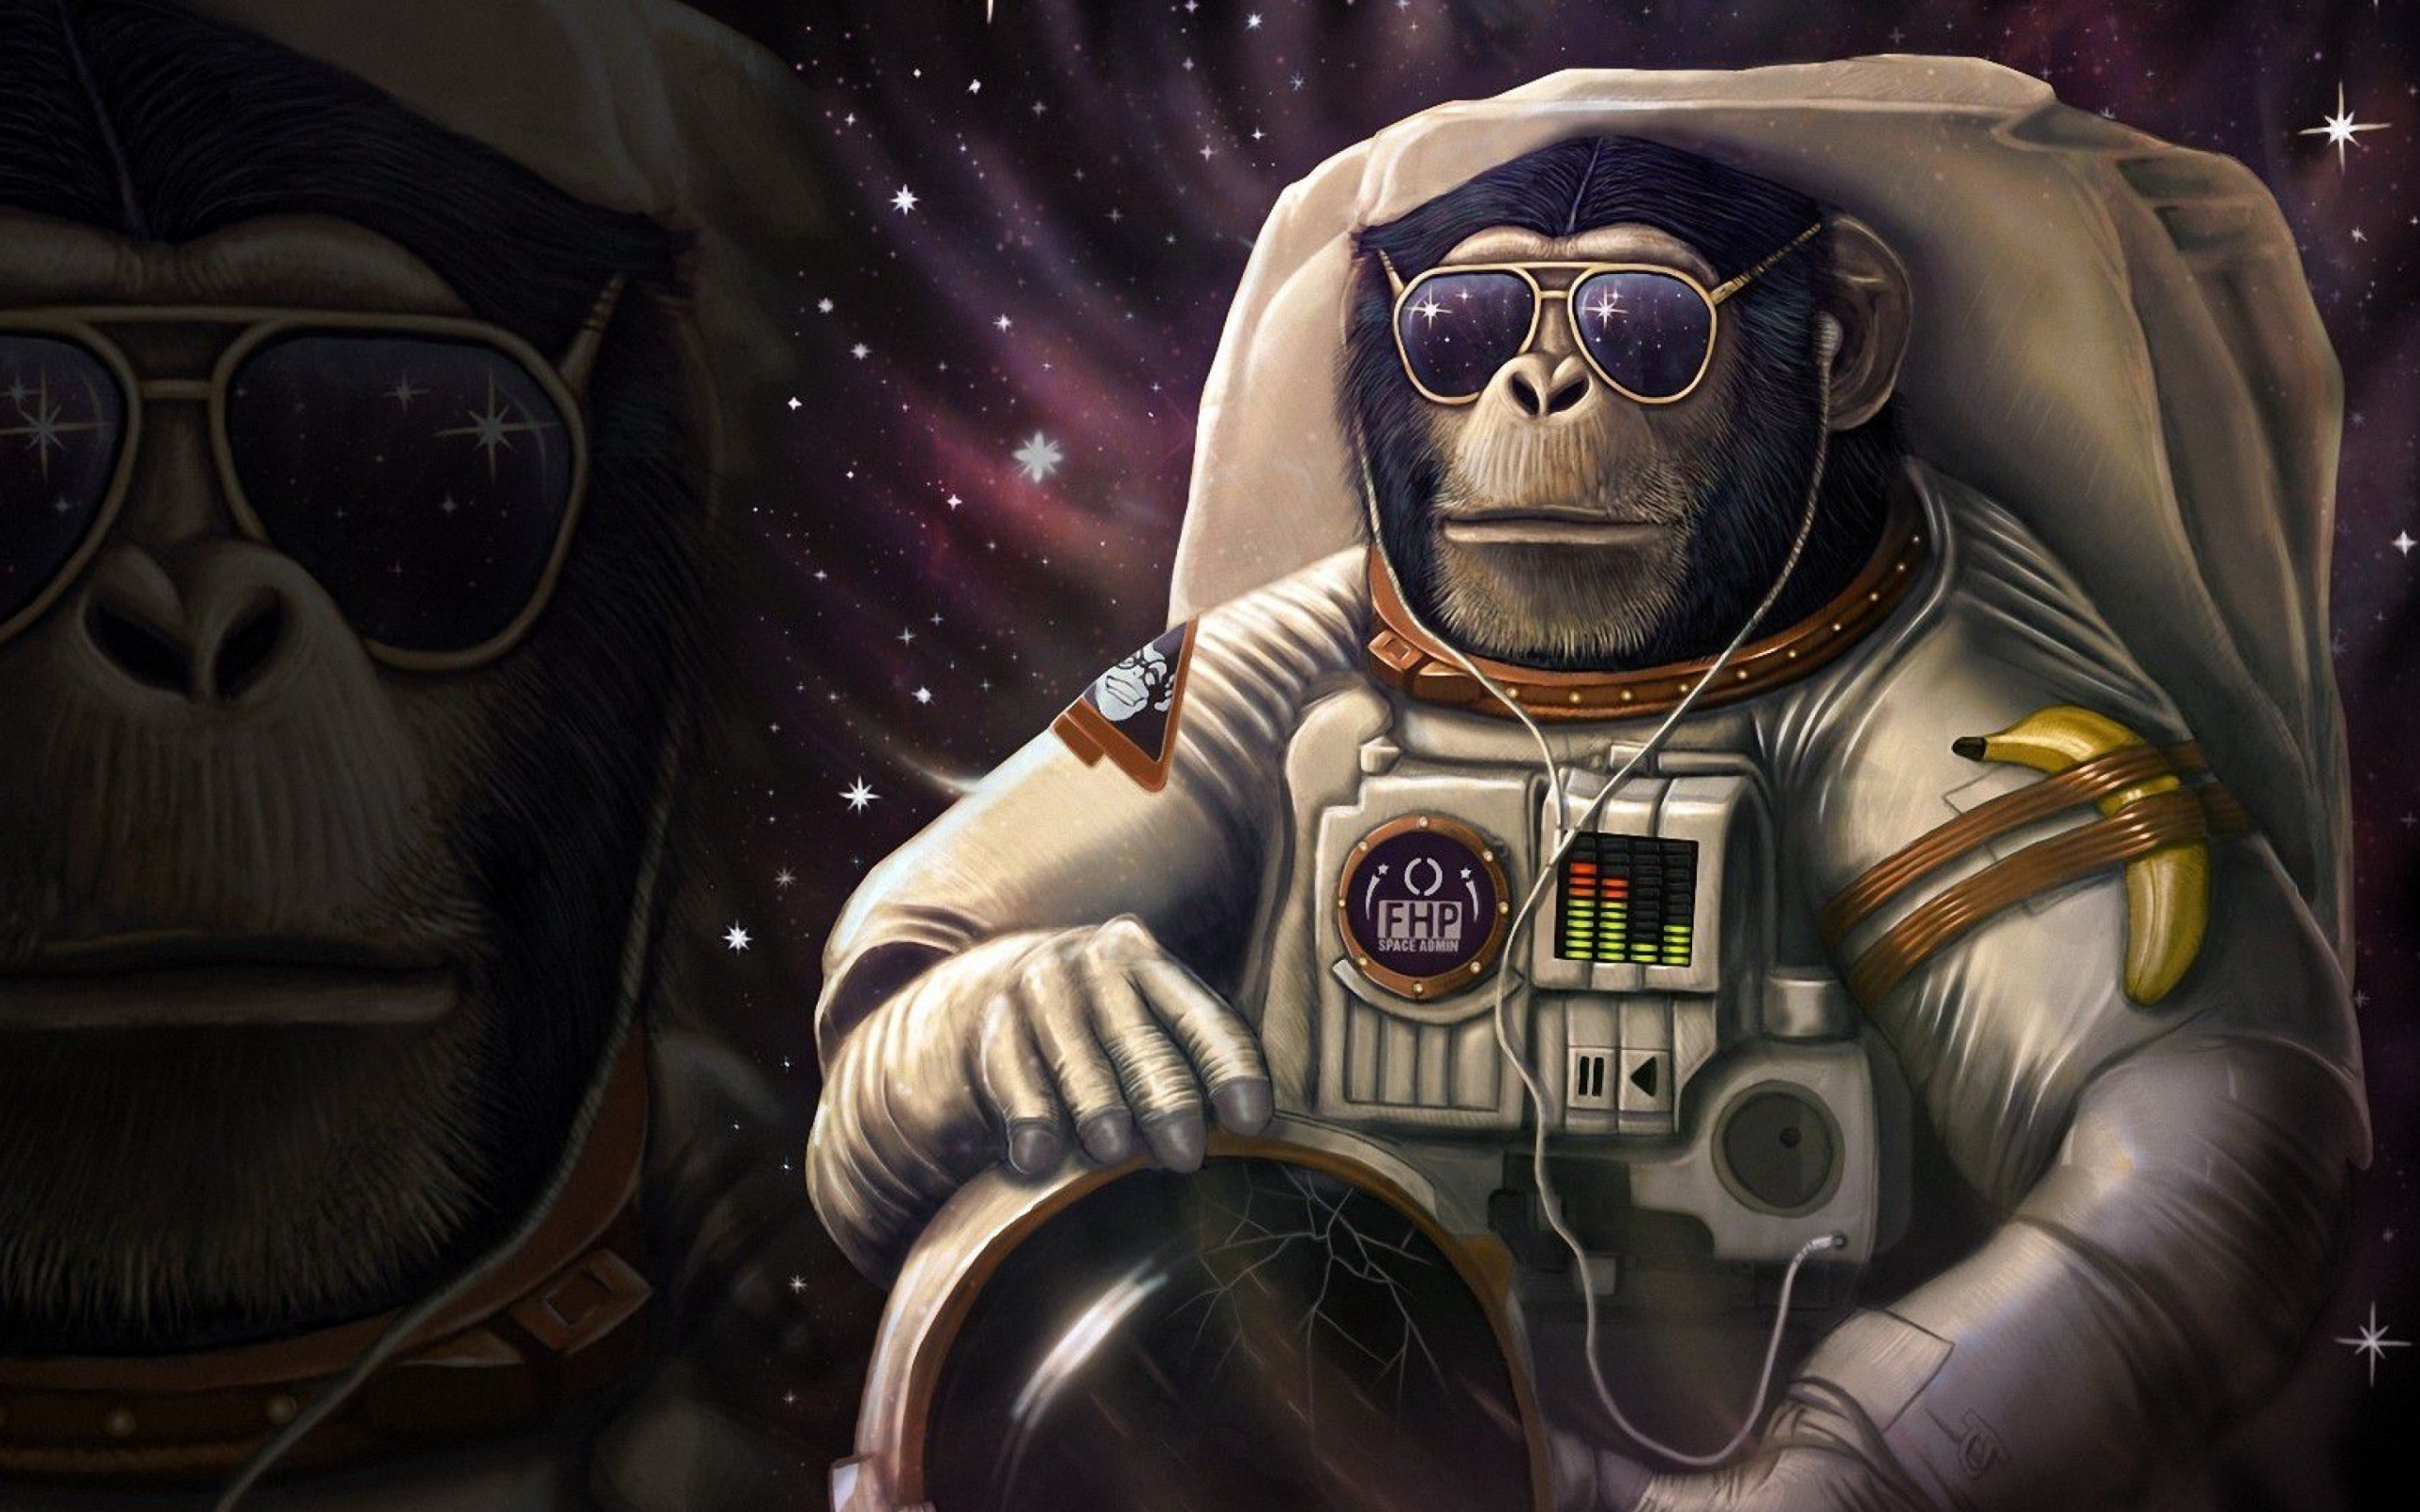 Das Monkeys and apes in space Wallpaper 2560x1600